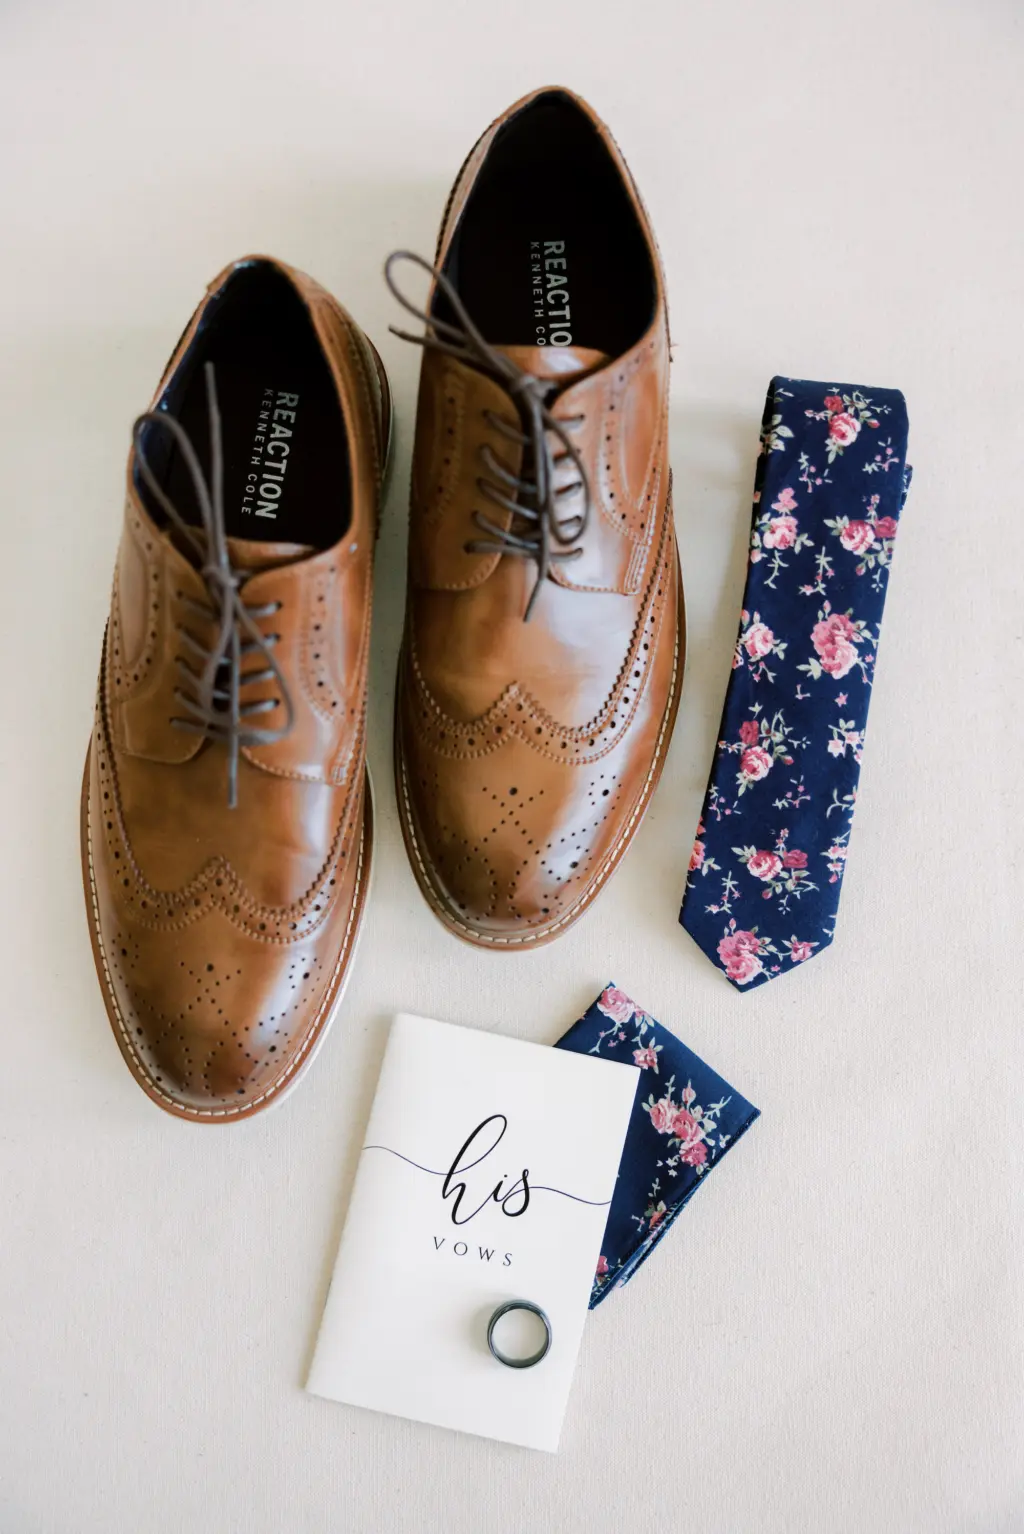 Brown Leather Oxford Wedding Shoe | Navy Tie and Pocket Square with Pink Flowers